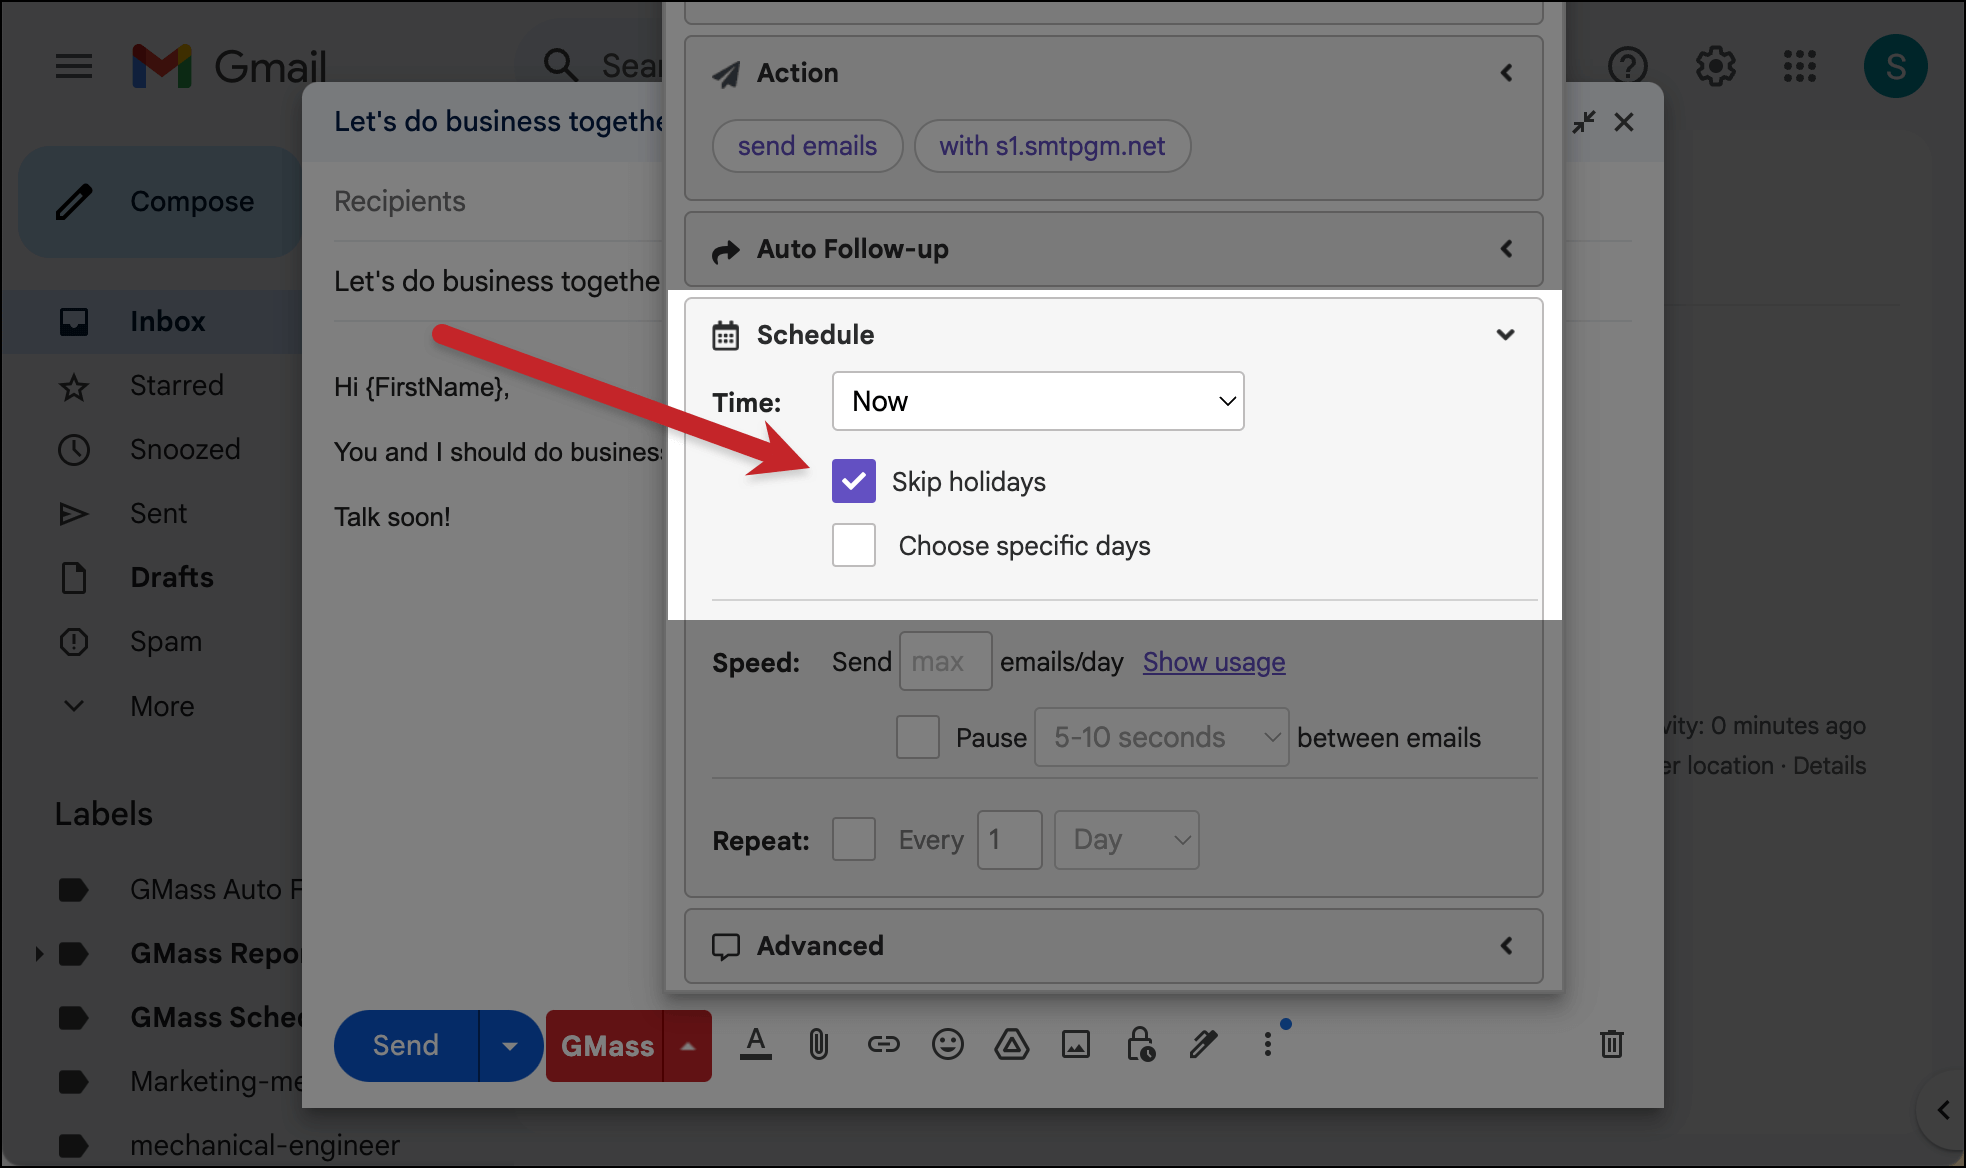 Check the box next to Skip Holidays in the Scheduling section of the settings box